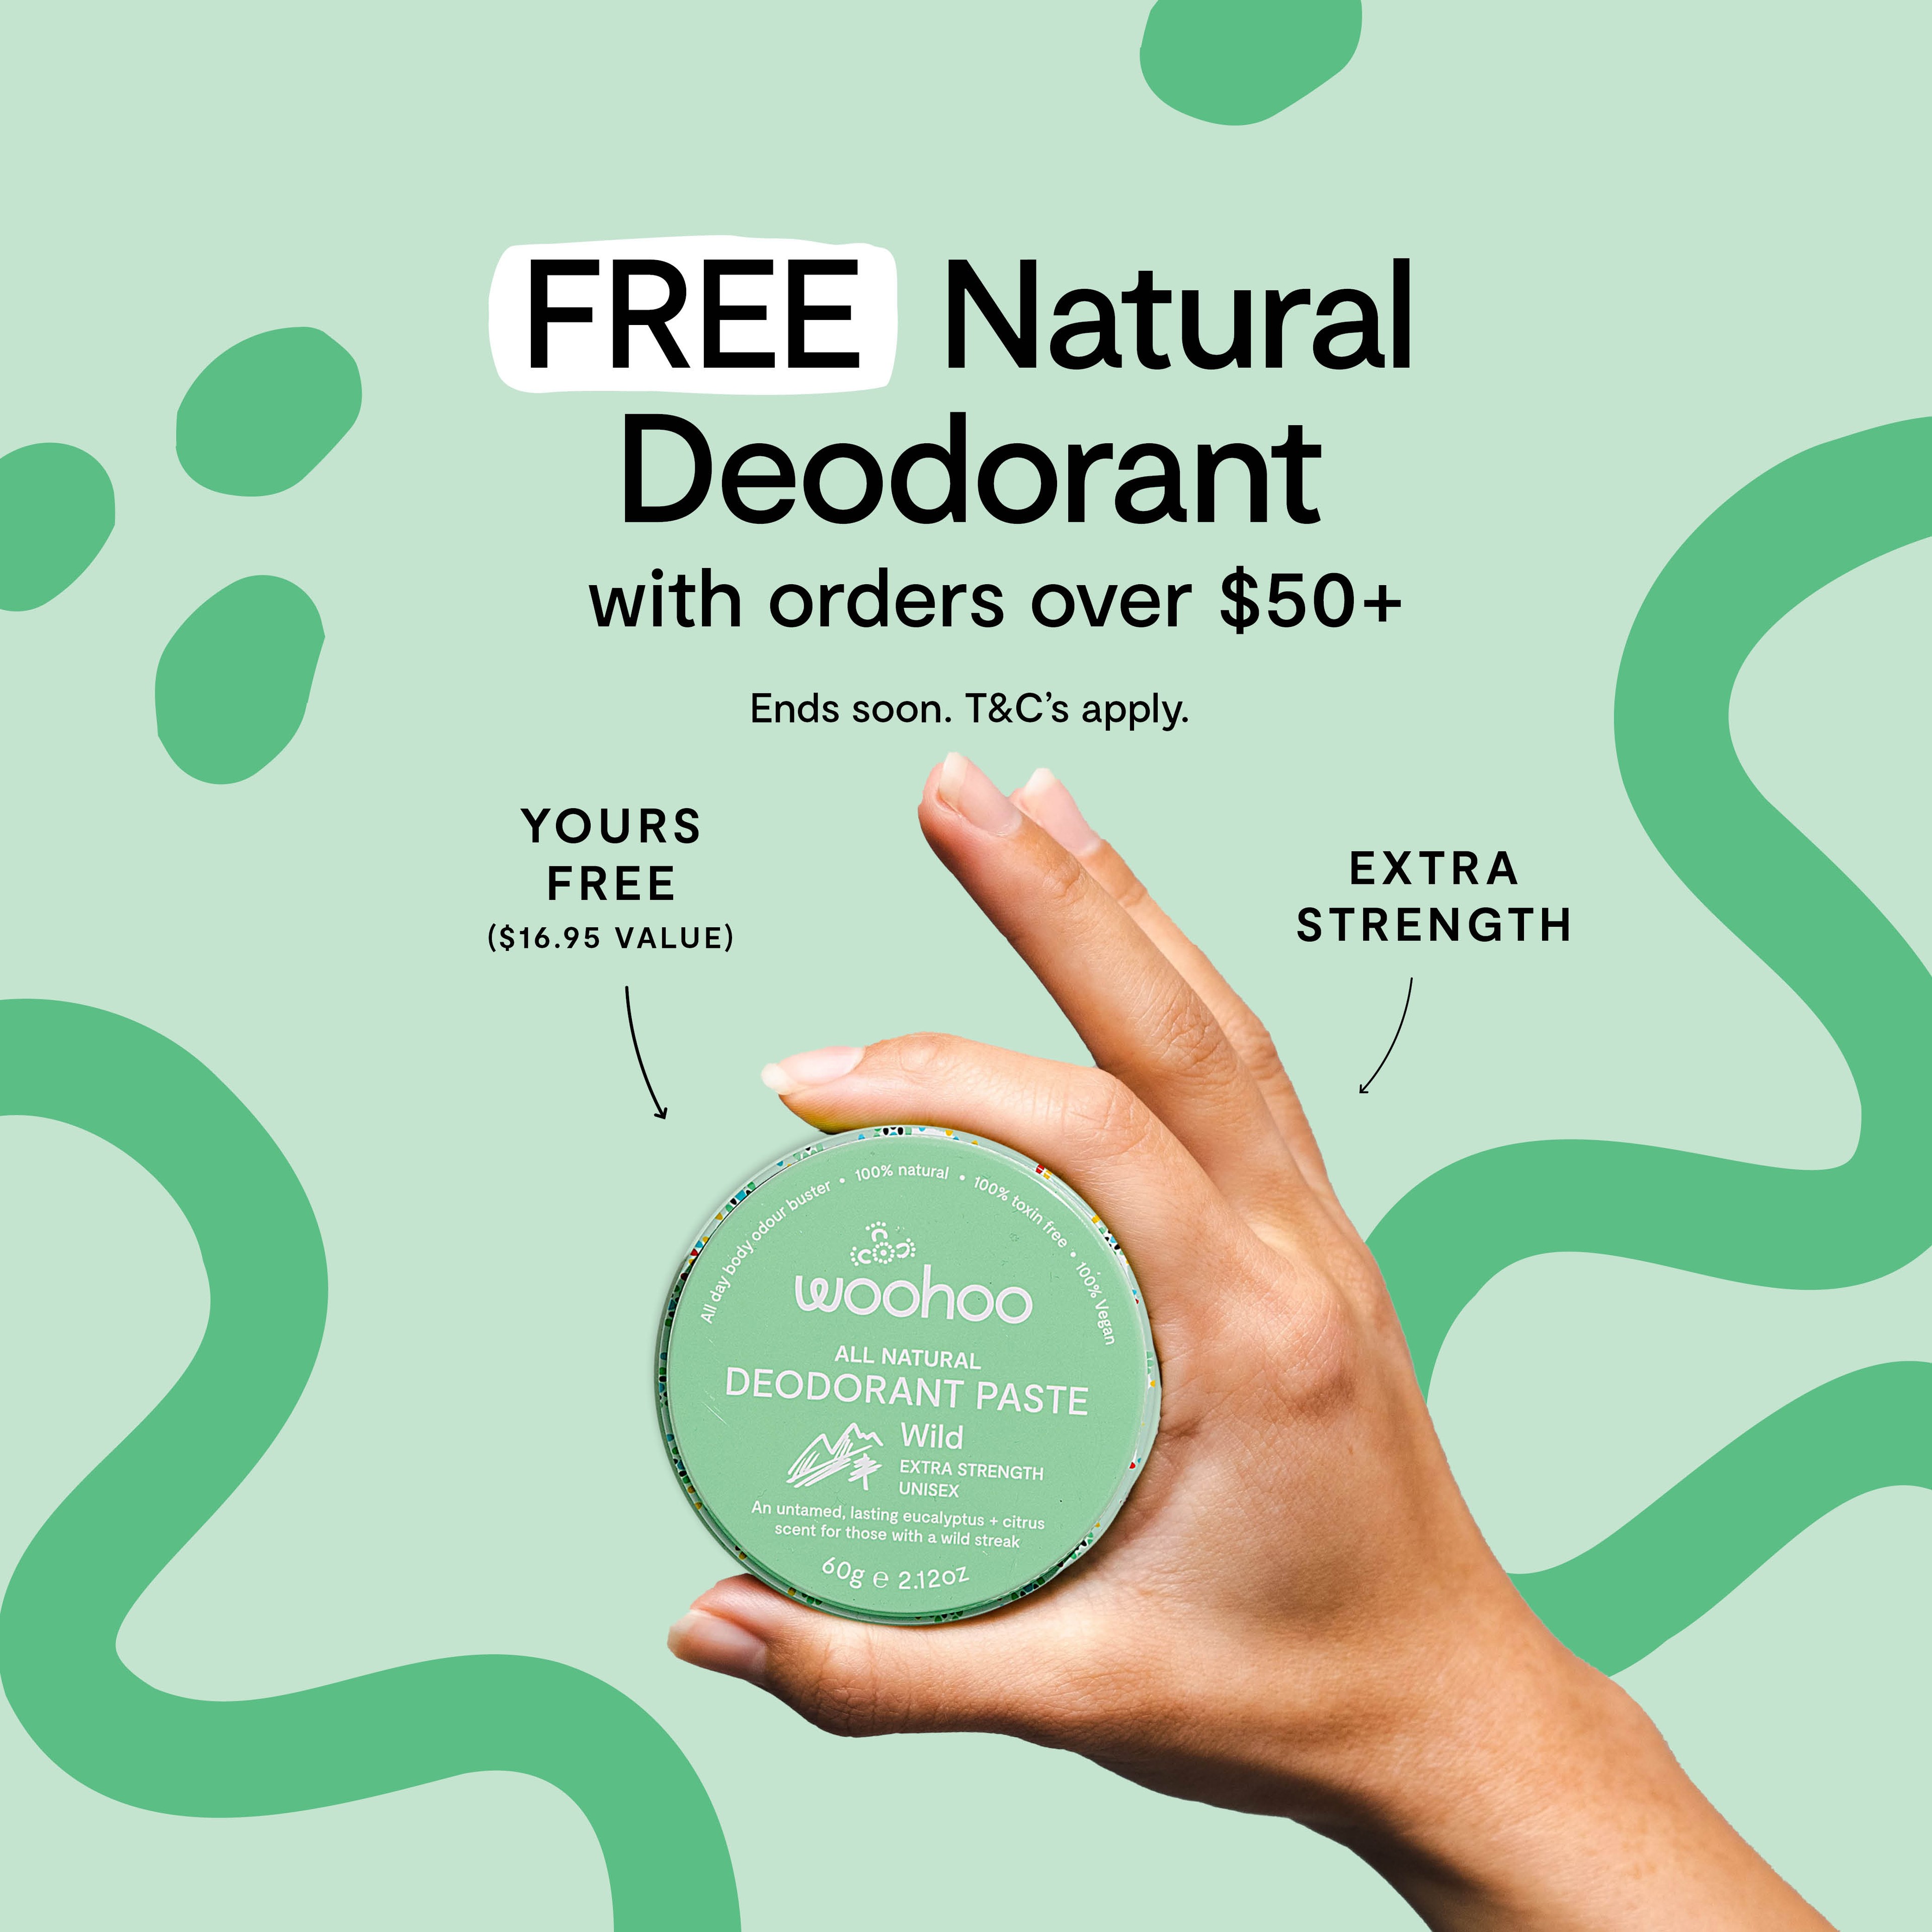 Free Woohoo Natural Deodorant Paste with orders over 50